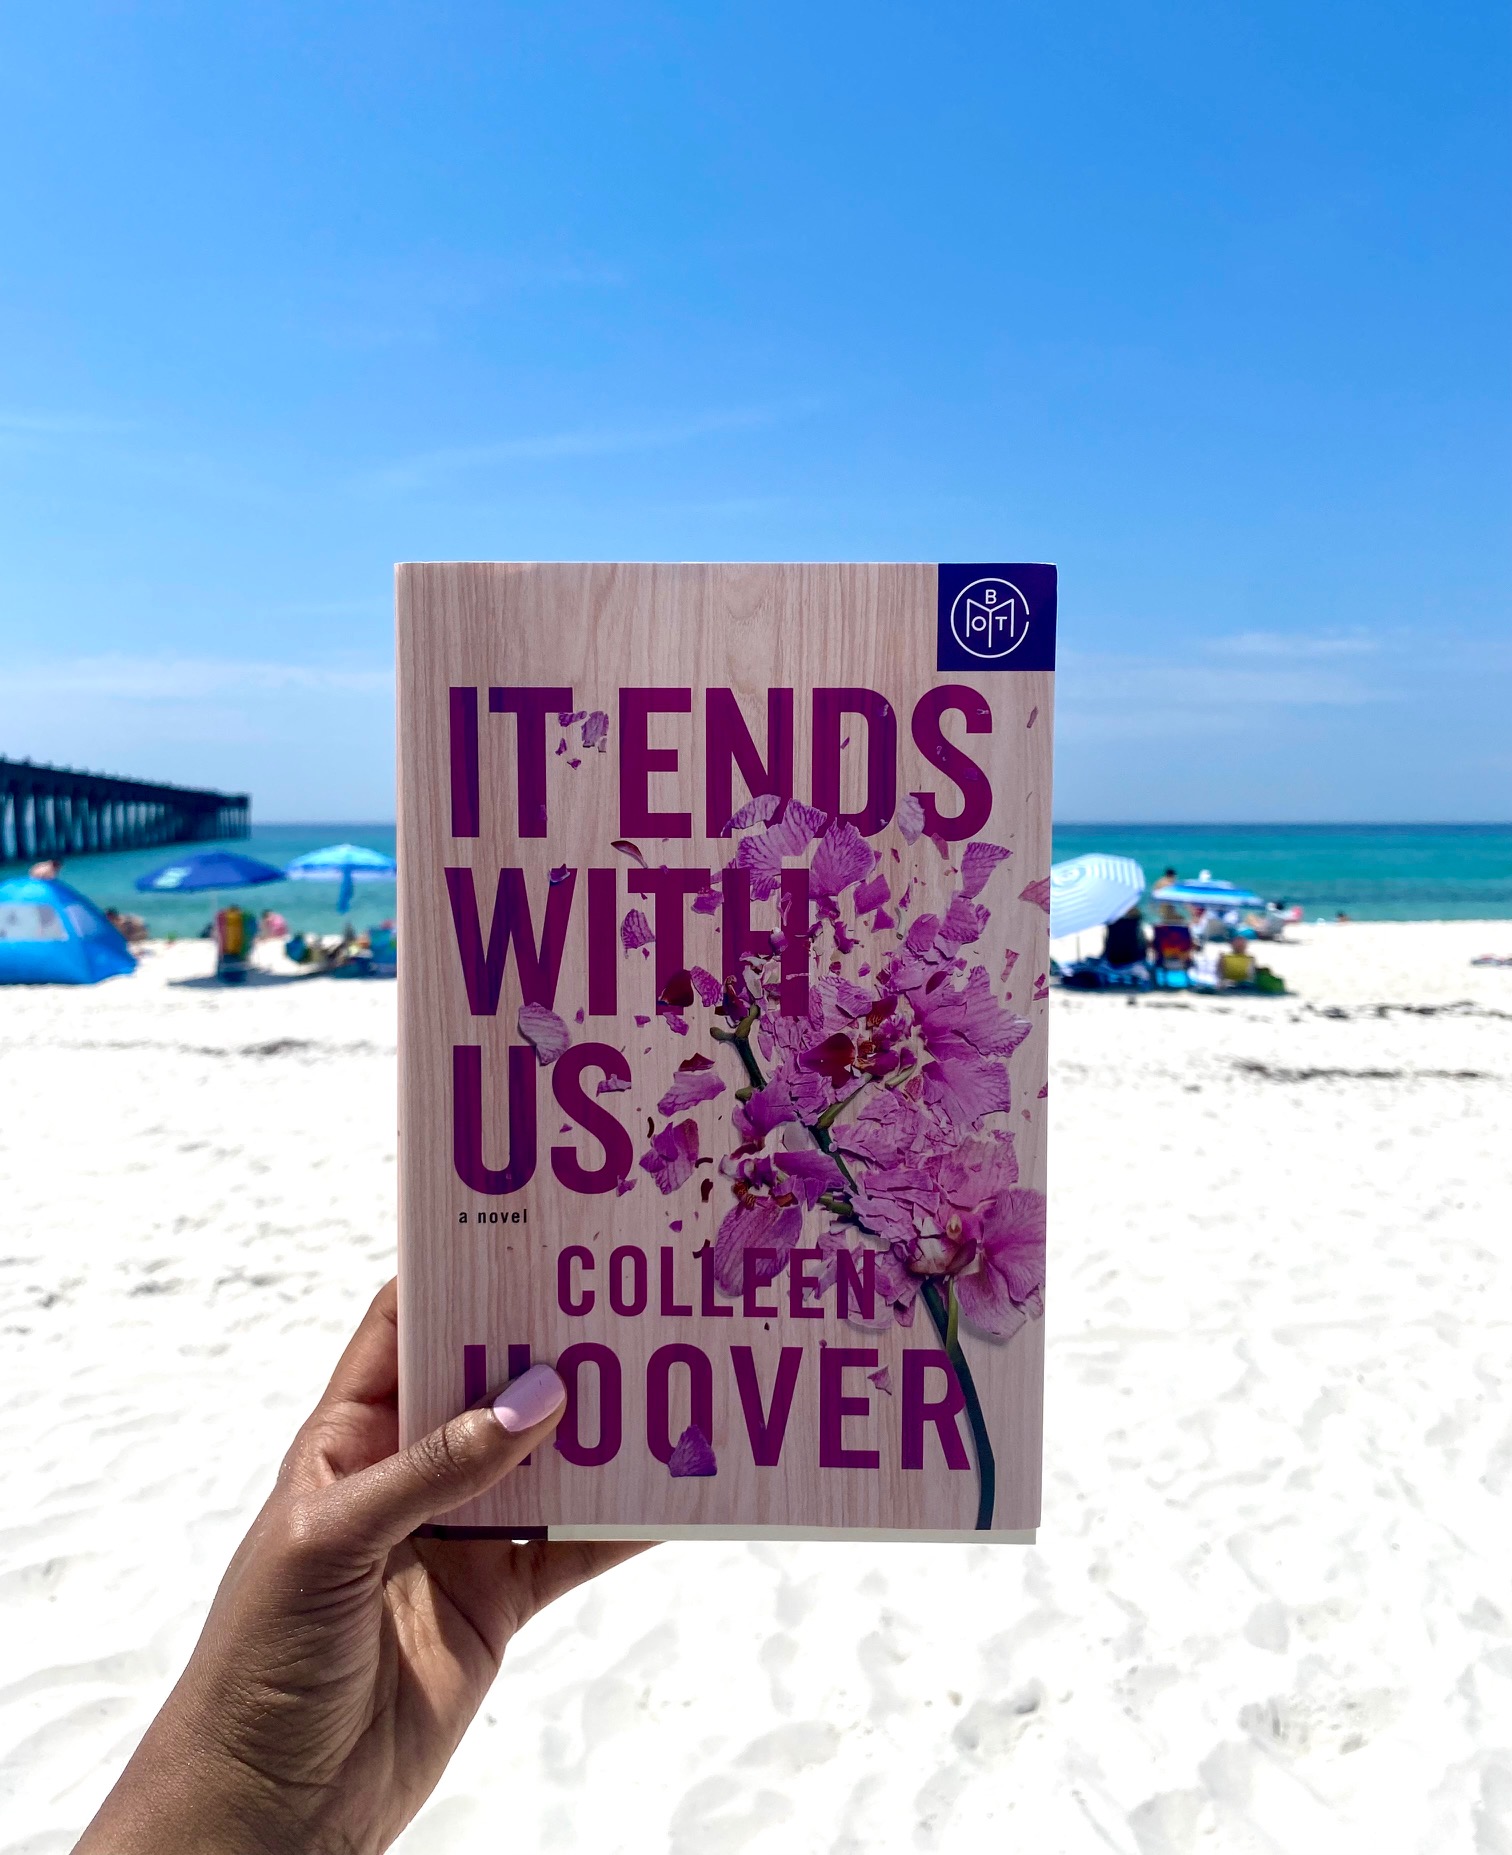 A Review “It Ends with Us” by Colleen Hoover